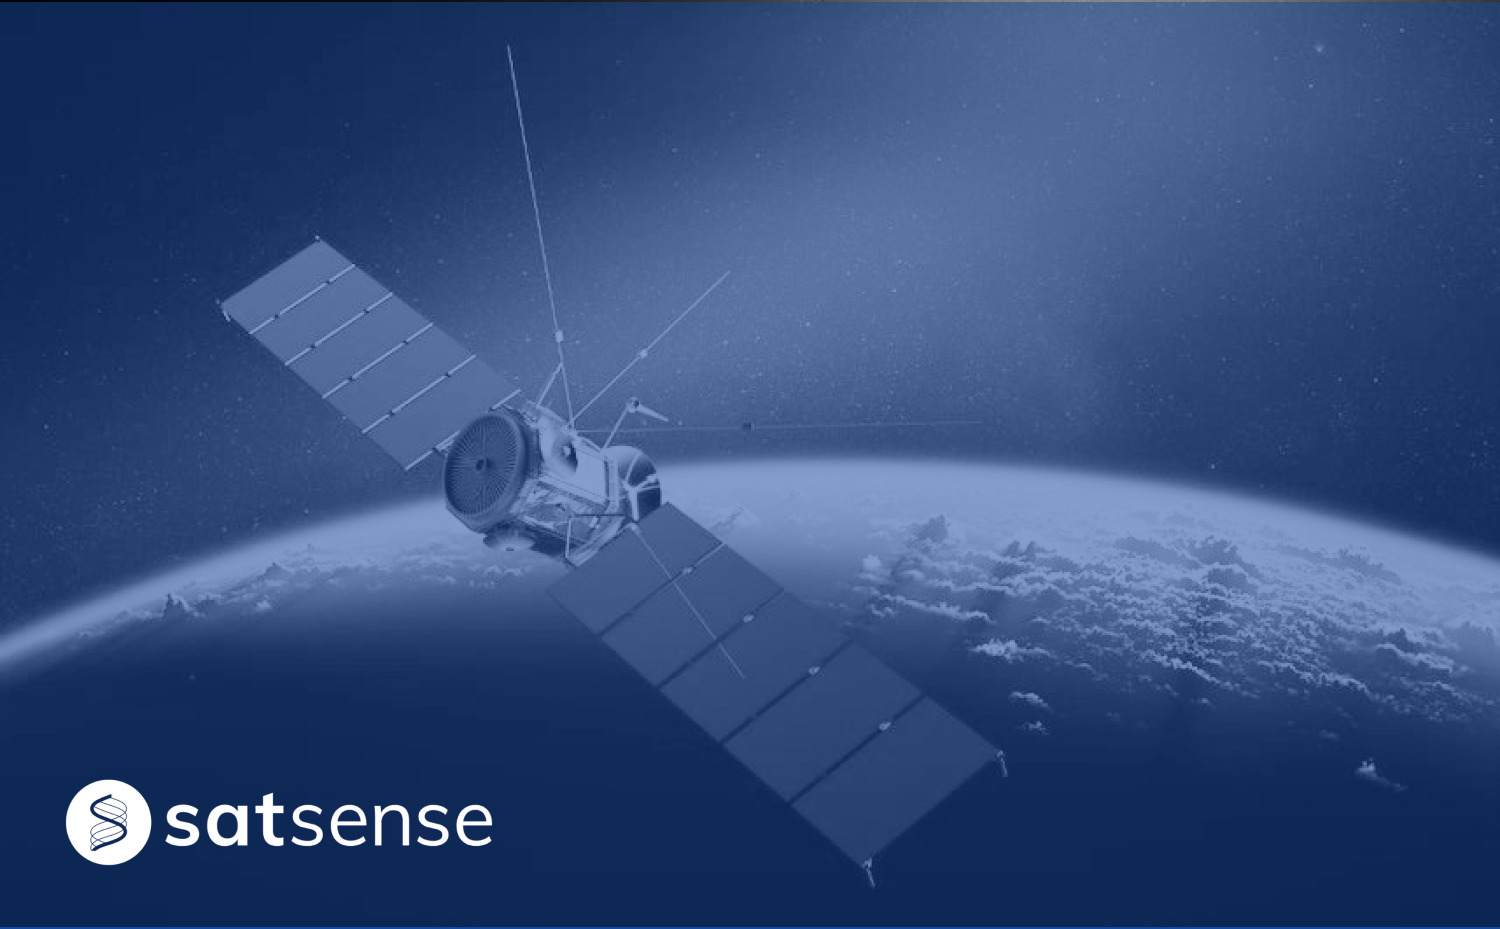 Satellite looking towards the Earth with SatSense logo on the bottom left corner